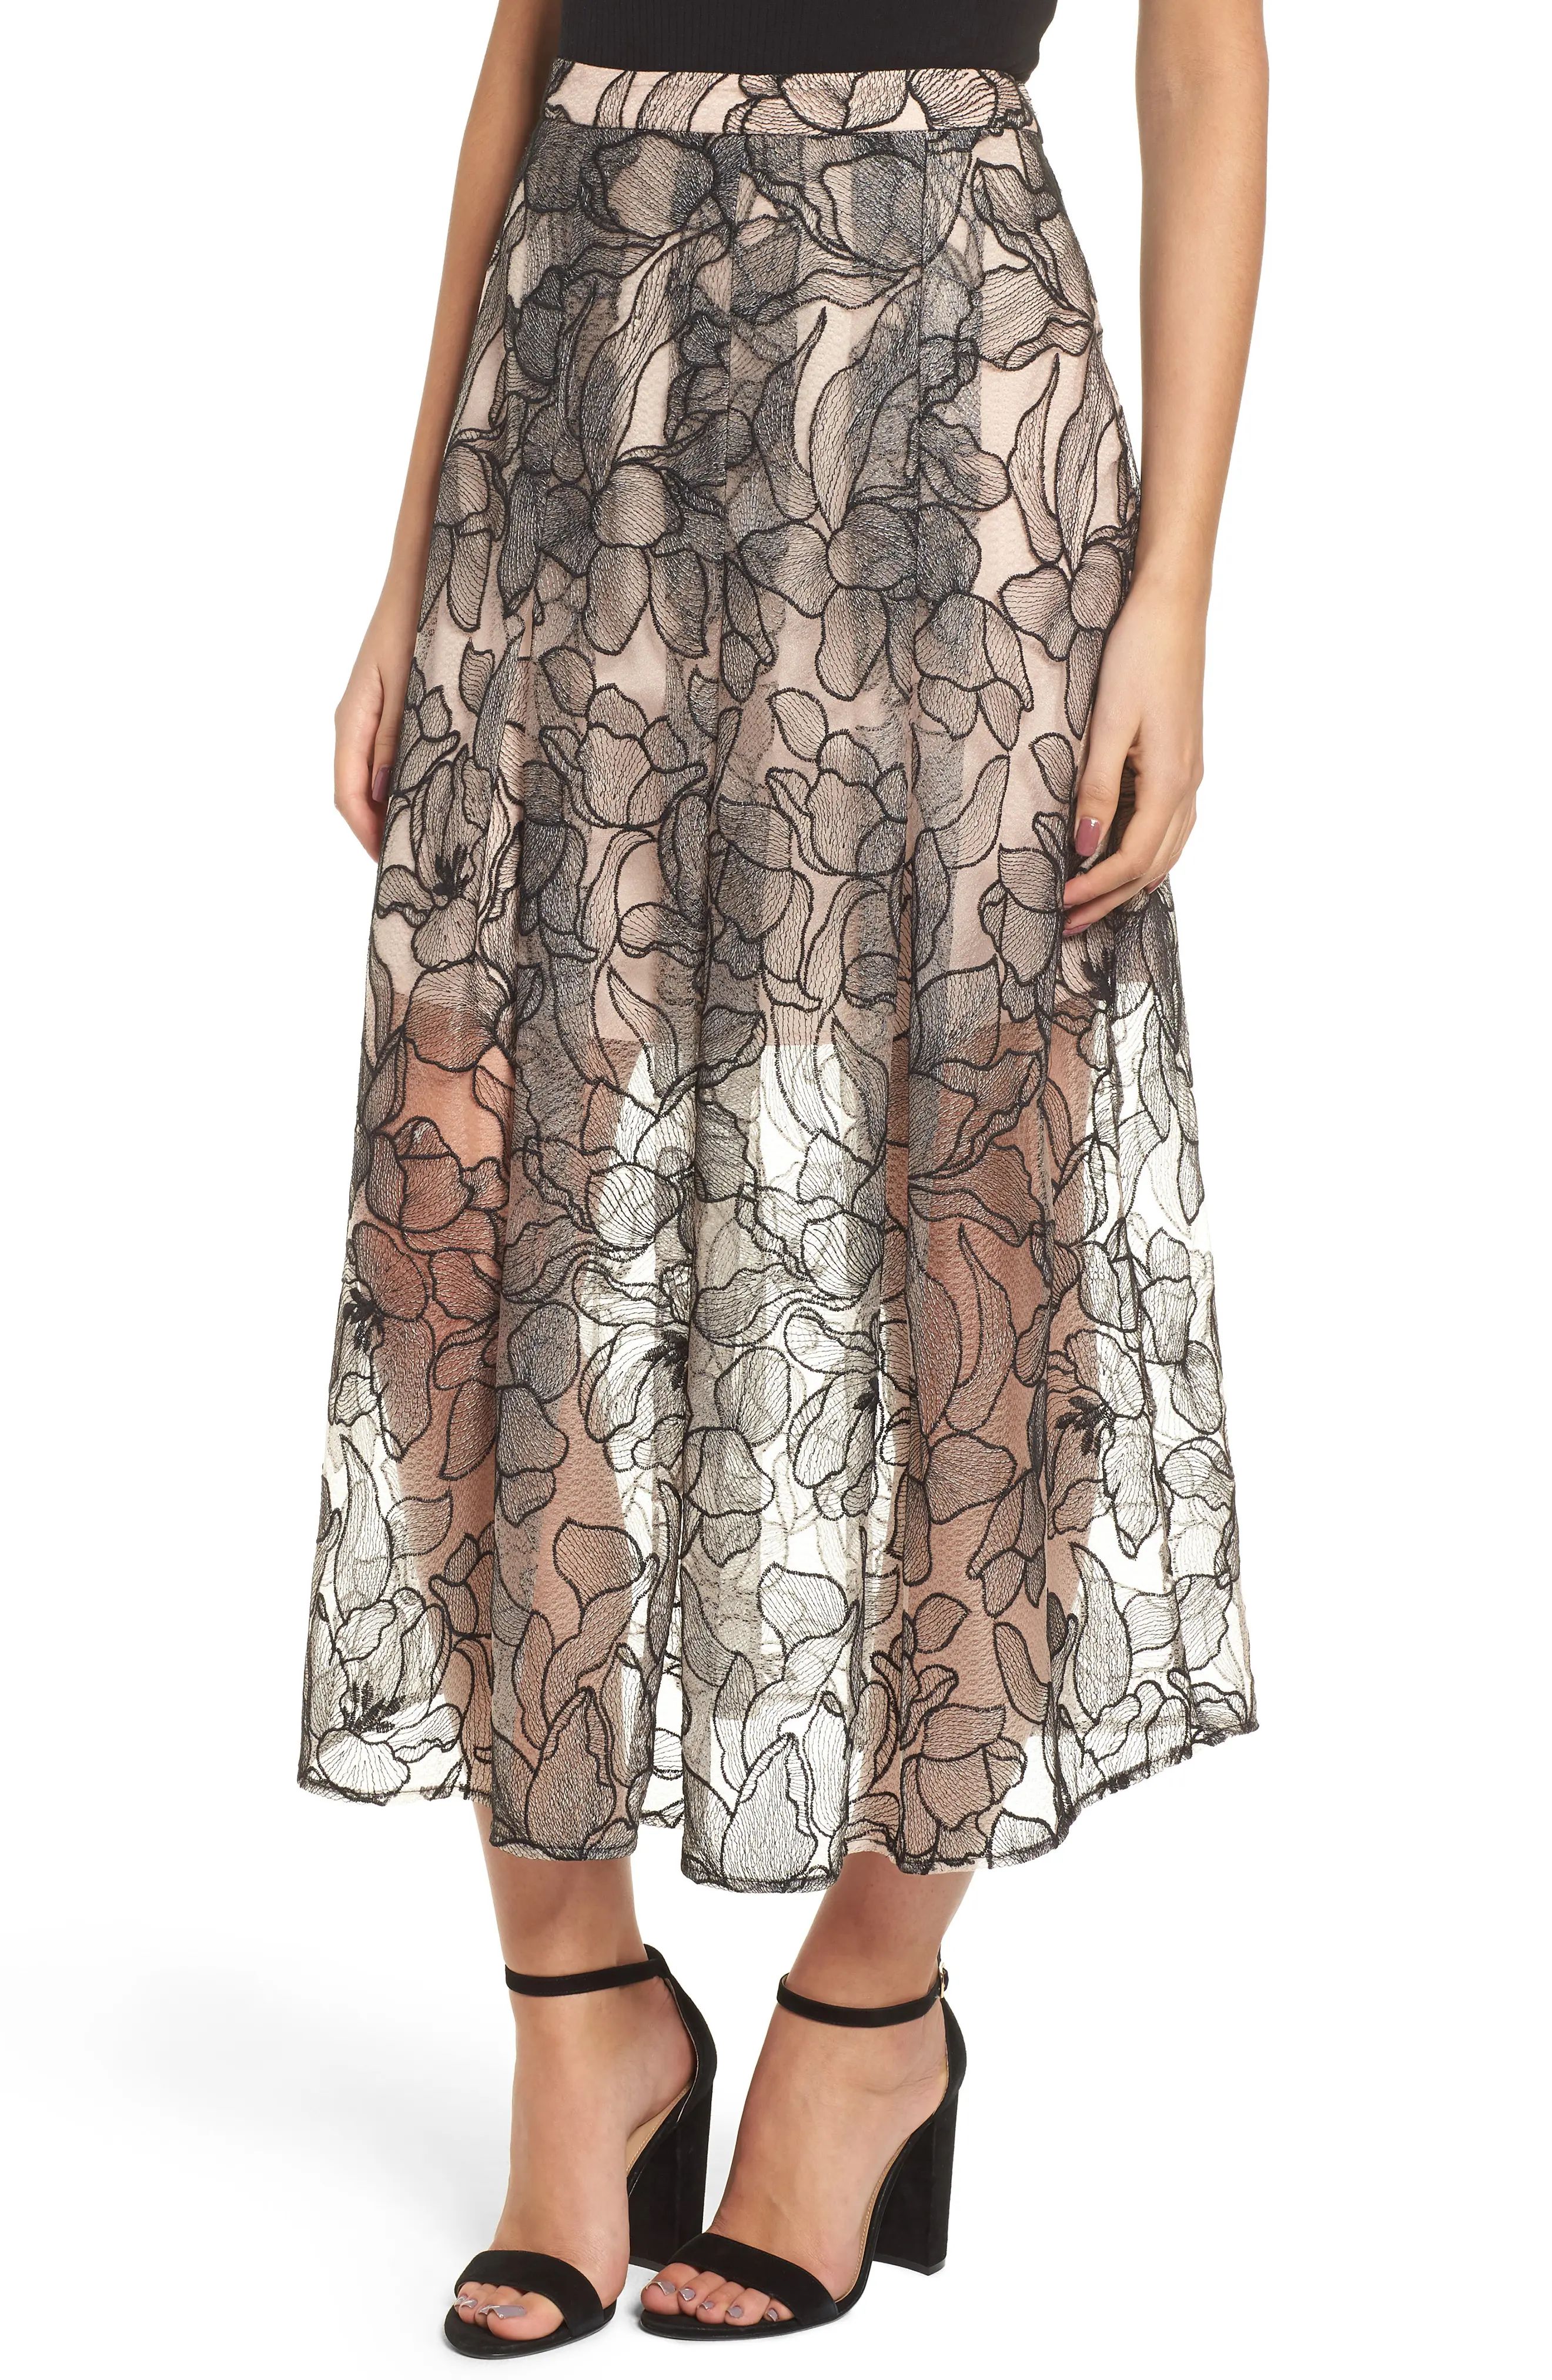 Women's Wayf Pleated Lace Skirt, Size X-Small - Black | Nordstrom